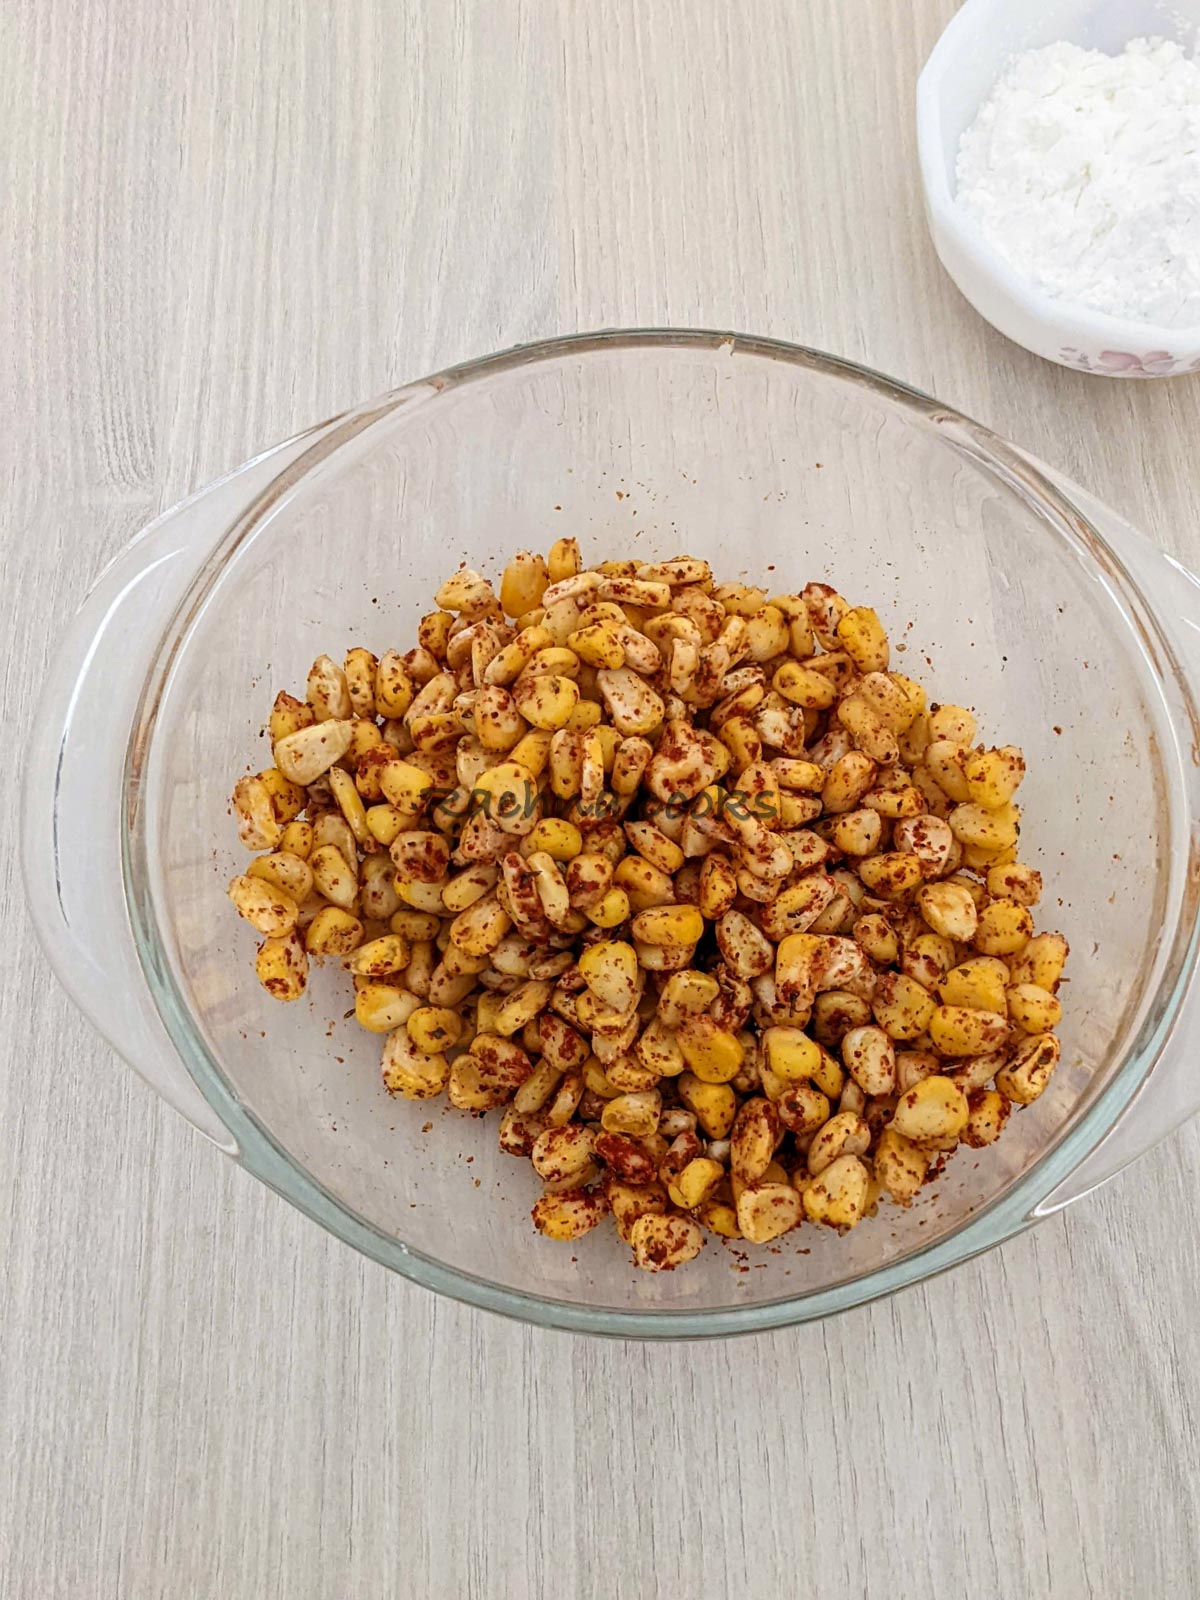 Sweet corn tossed with spices in a large bowl